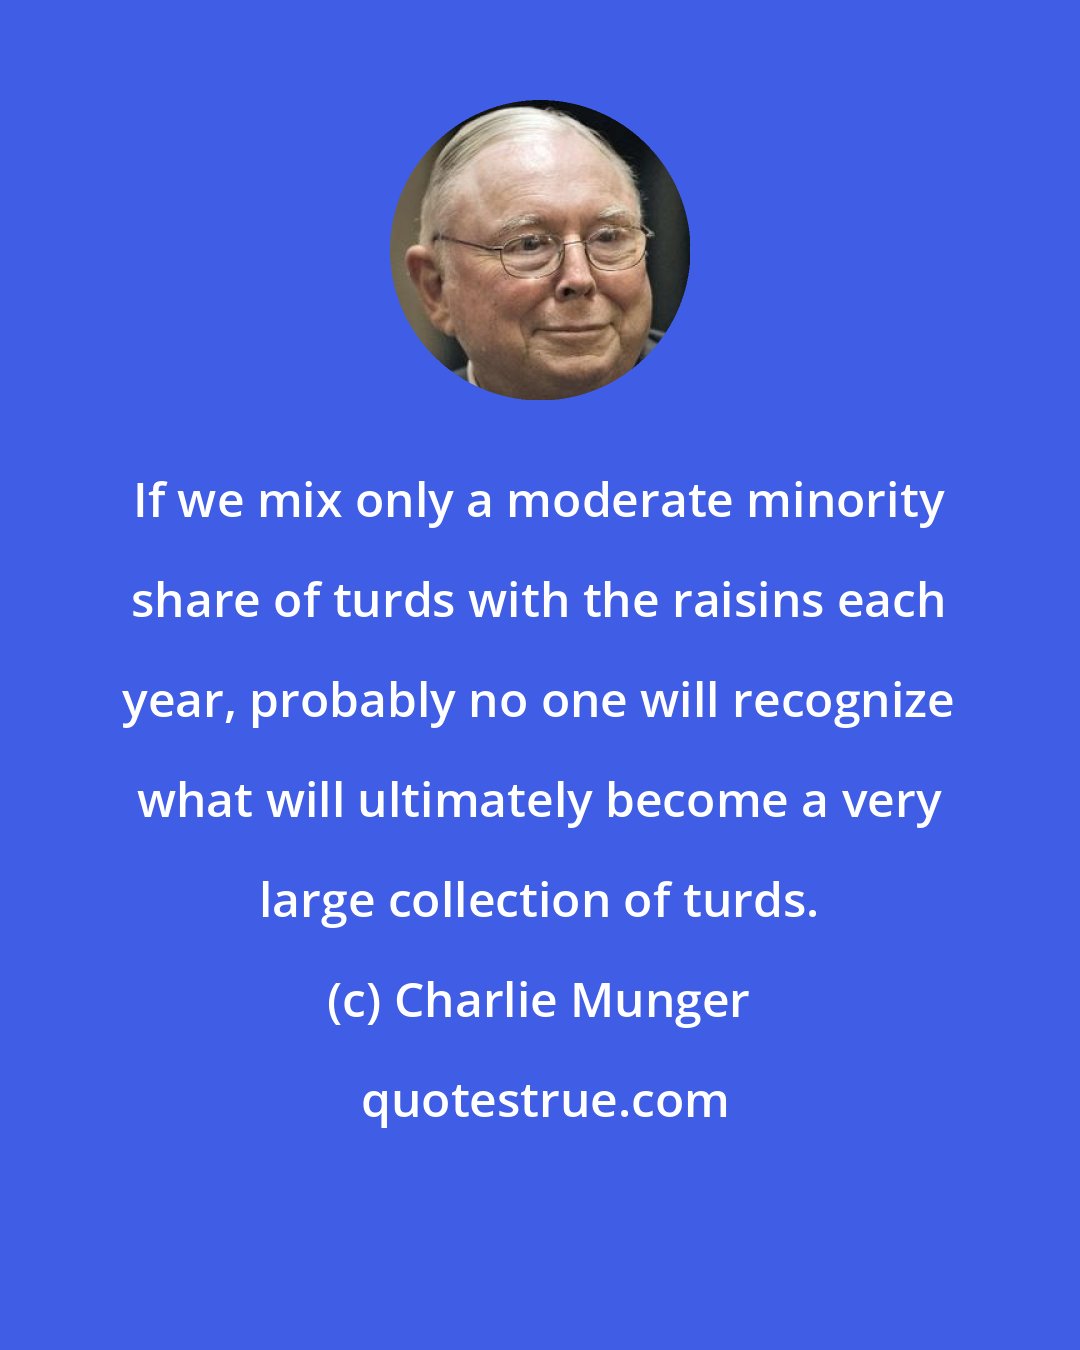 Charlie Munger: If we mix only a moderate minority share of turds with the raisins each year, probably no one will recognize what will ultimately become a very large collection of turds.